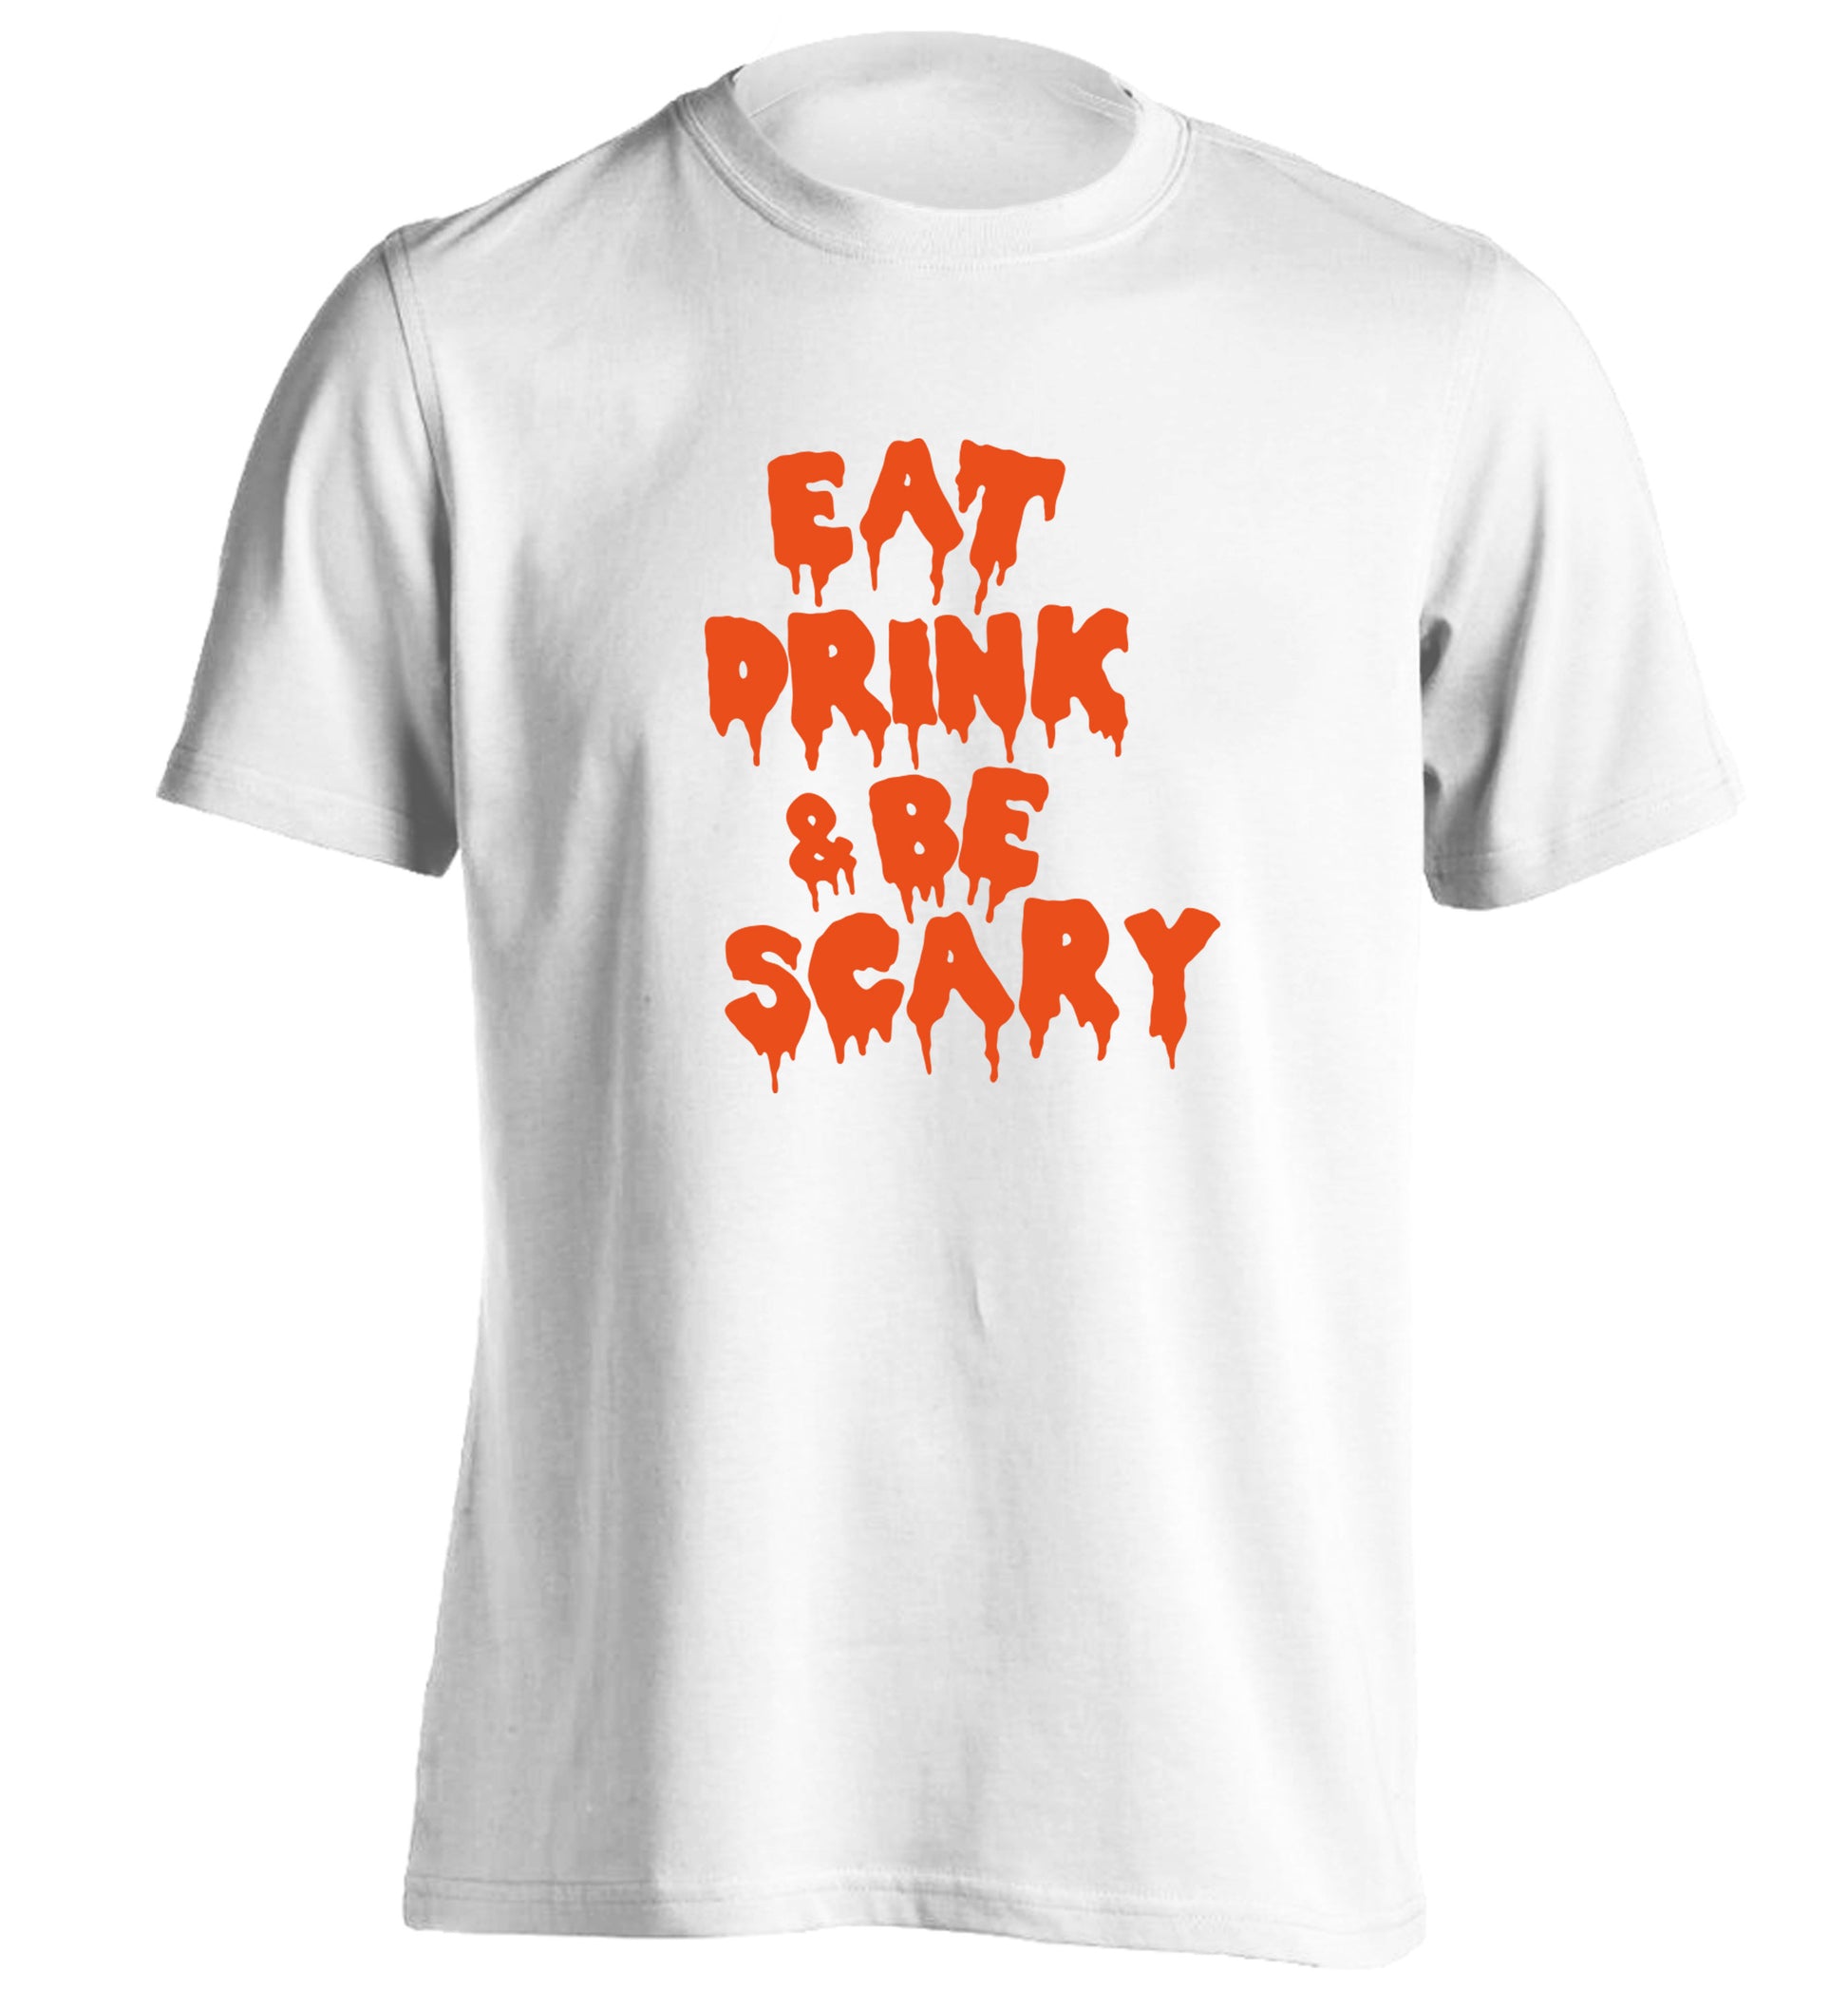 Eat drink and be scary adults unisex white Tshirt 2XL